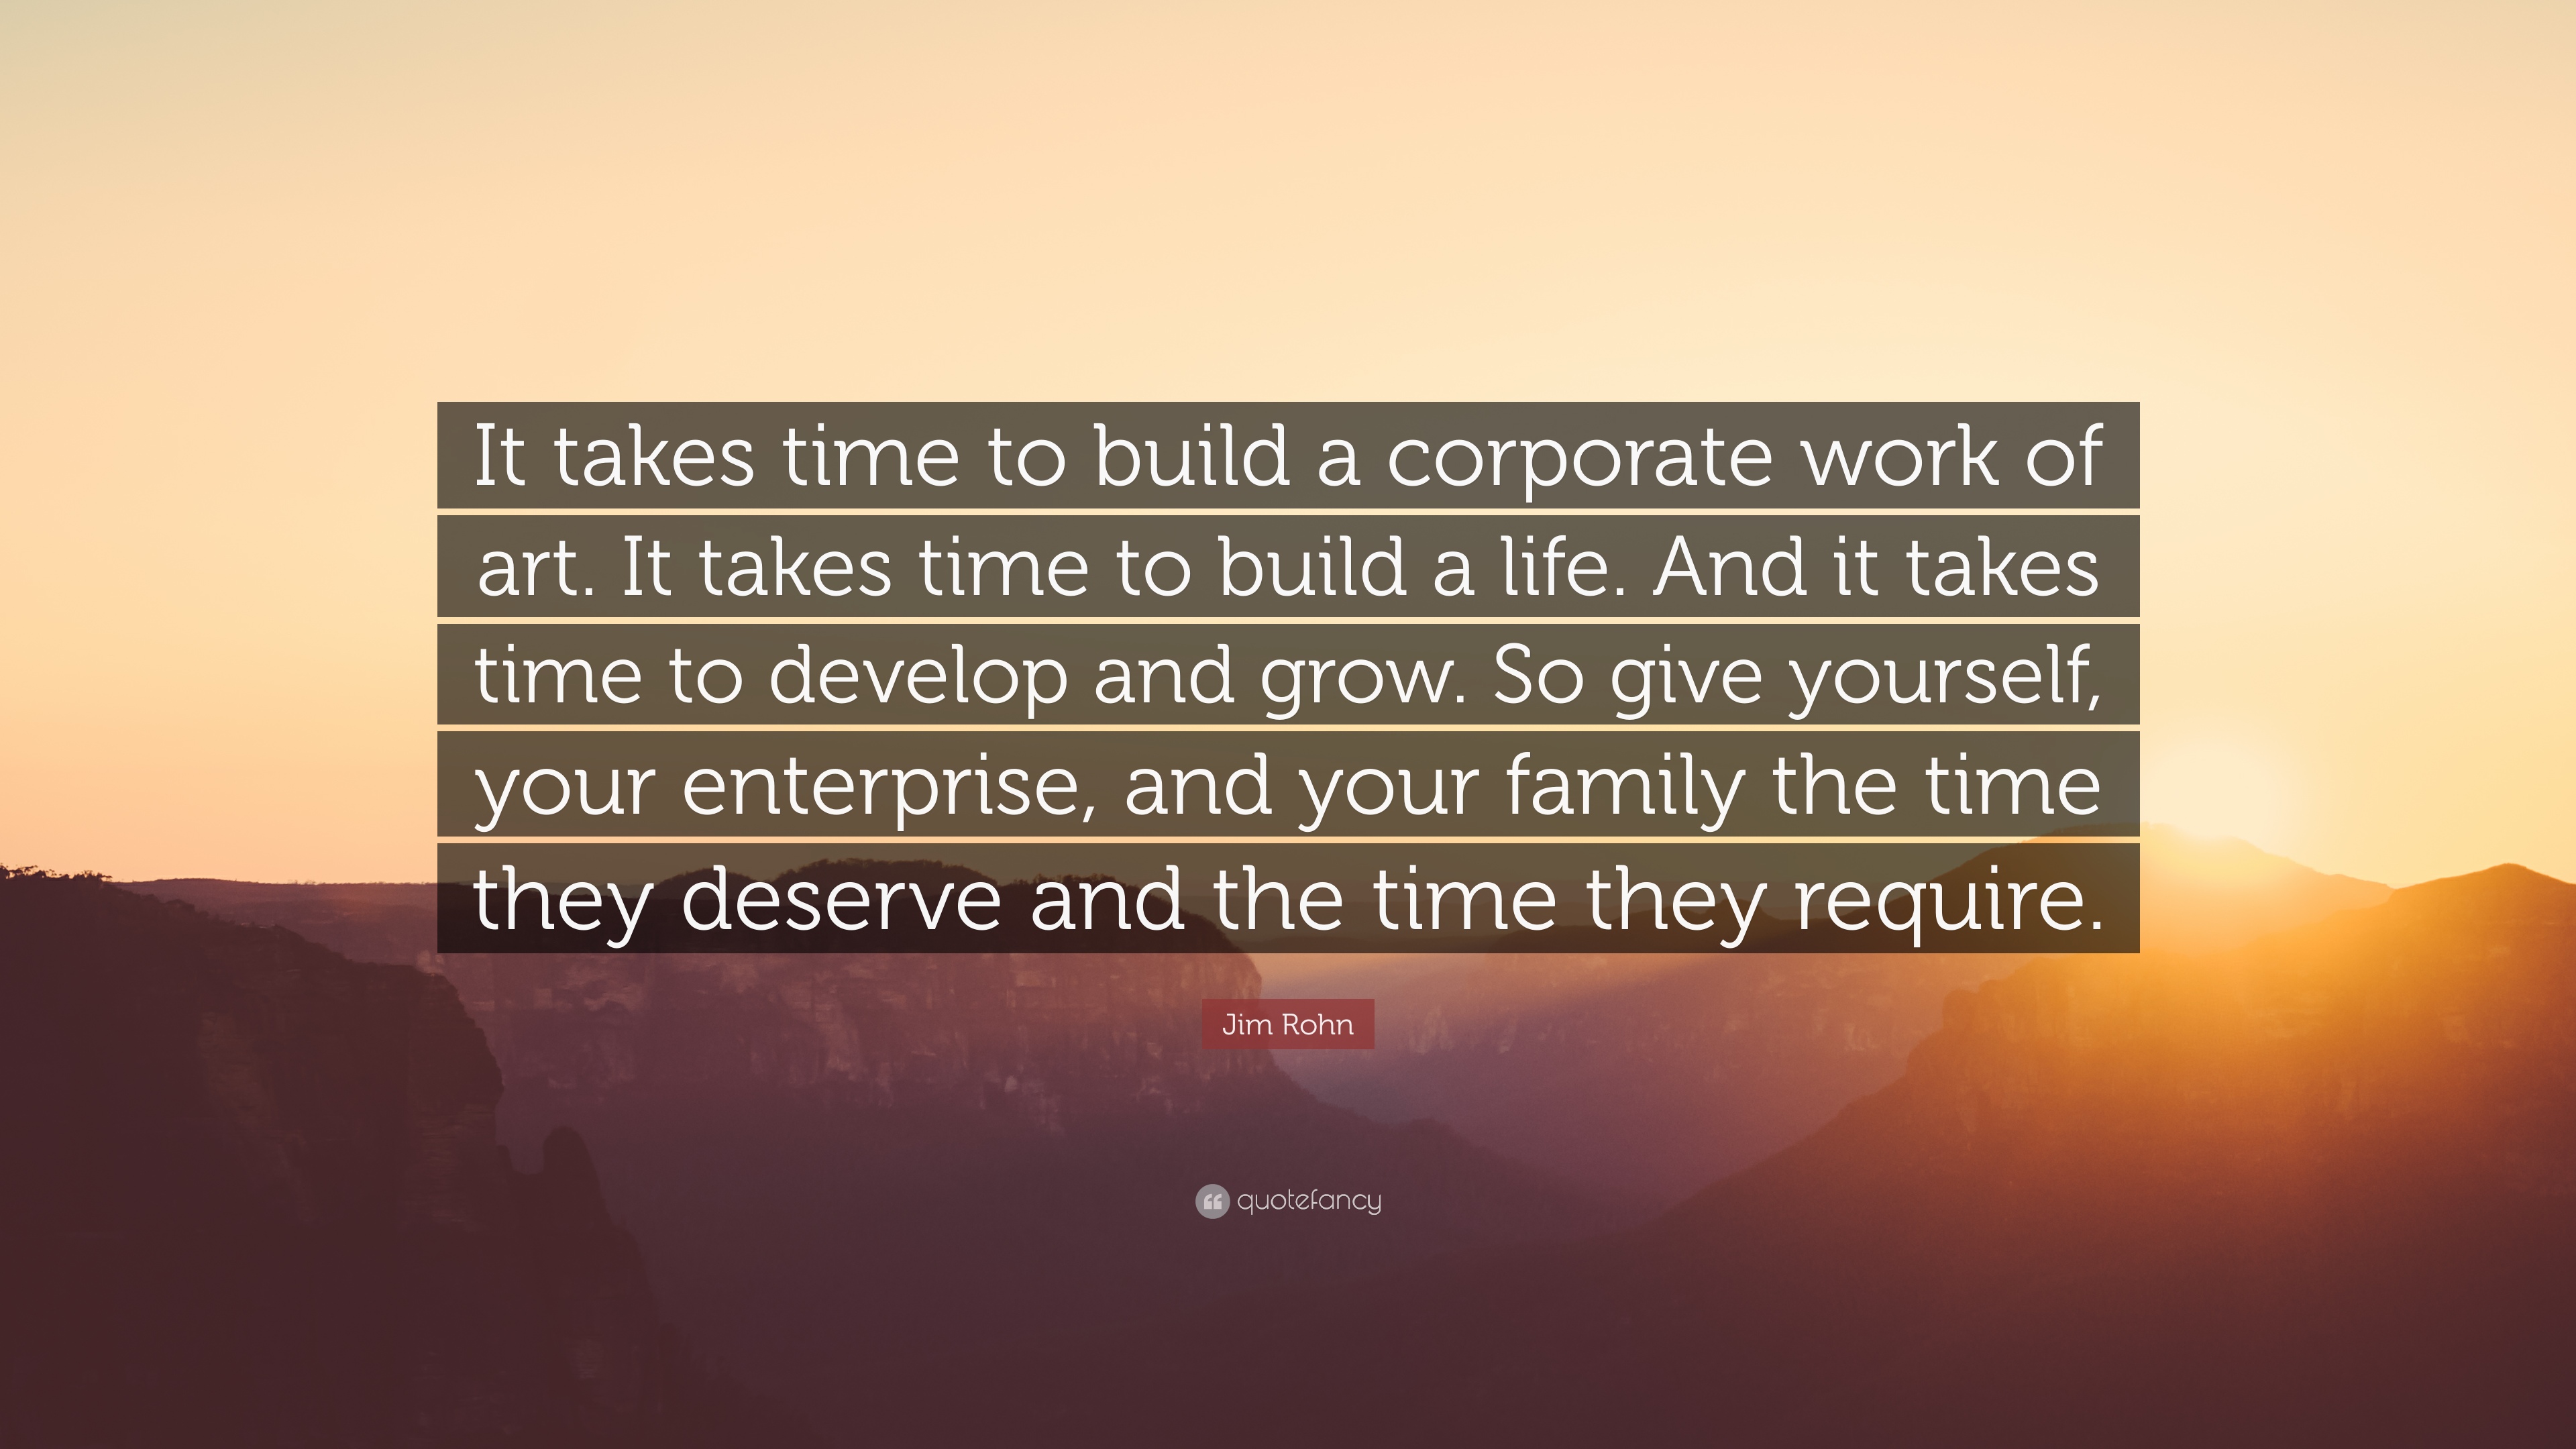 Jim Rohn Quote: “It takes time to build a corporate work of art. It ...